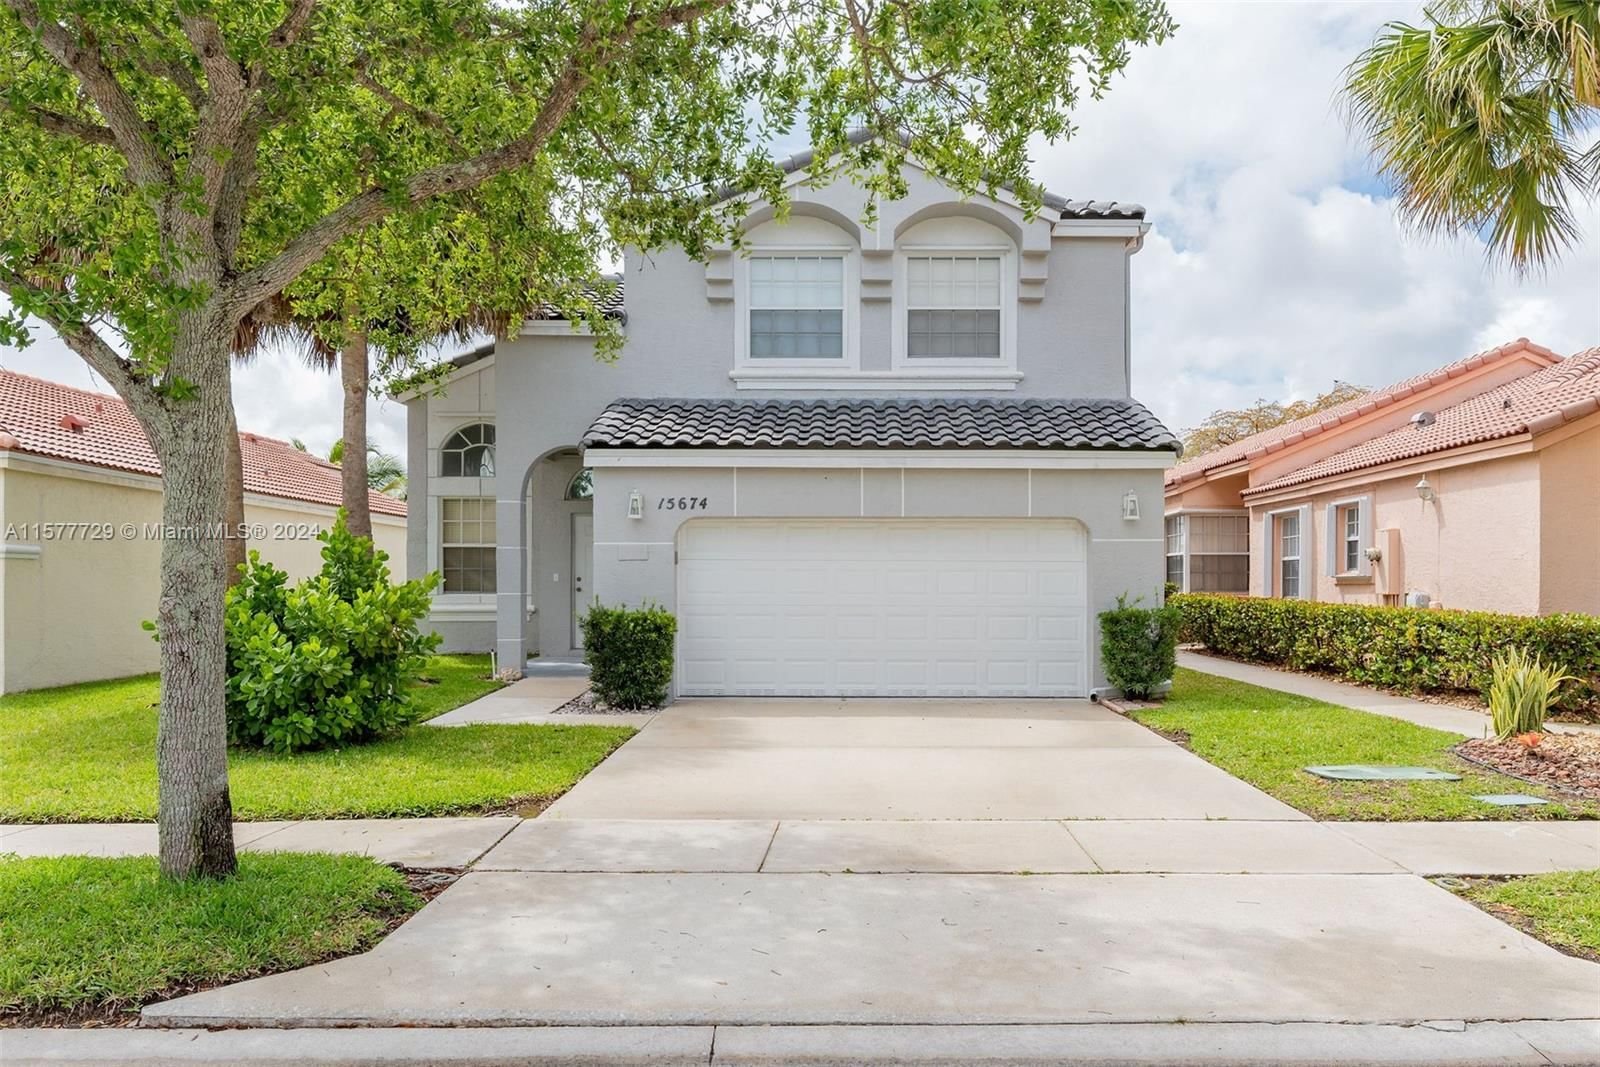 Real estate property located at 15674 12th Mnr, Broward County, TOWNGATE, Pembroke Pines, FL